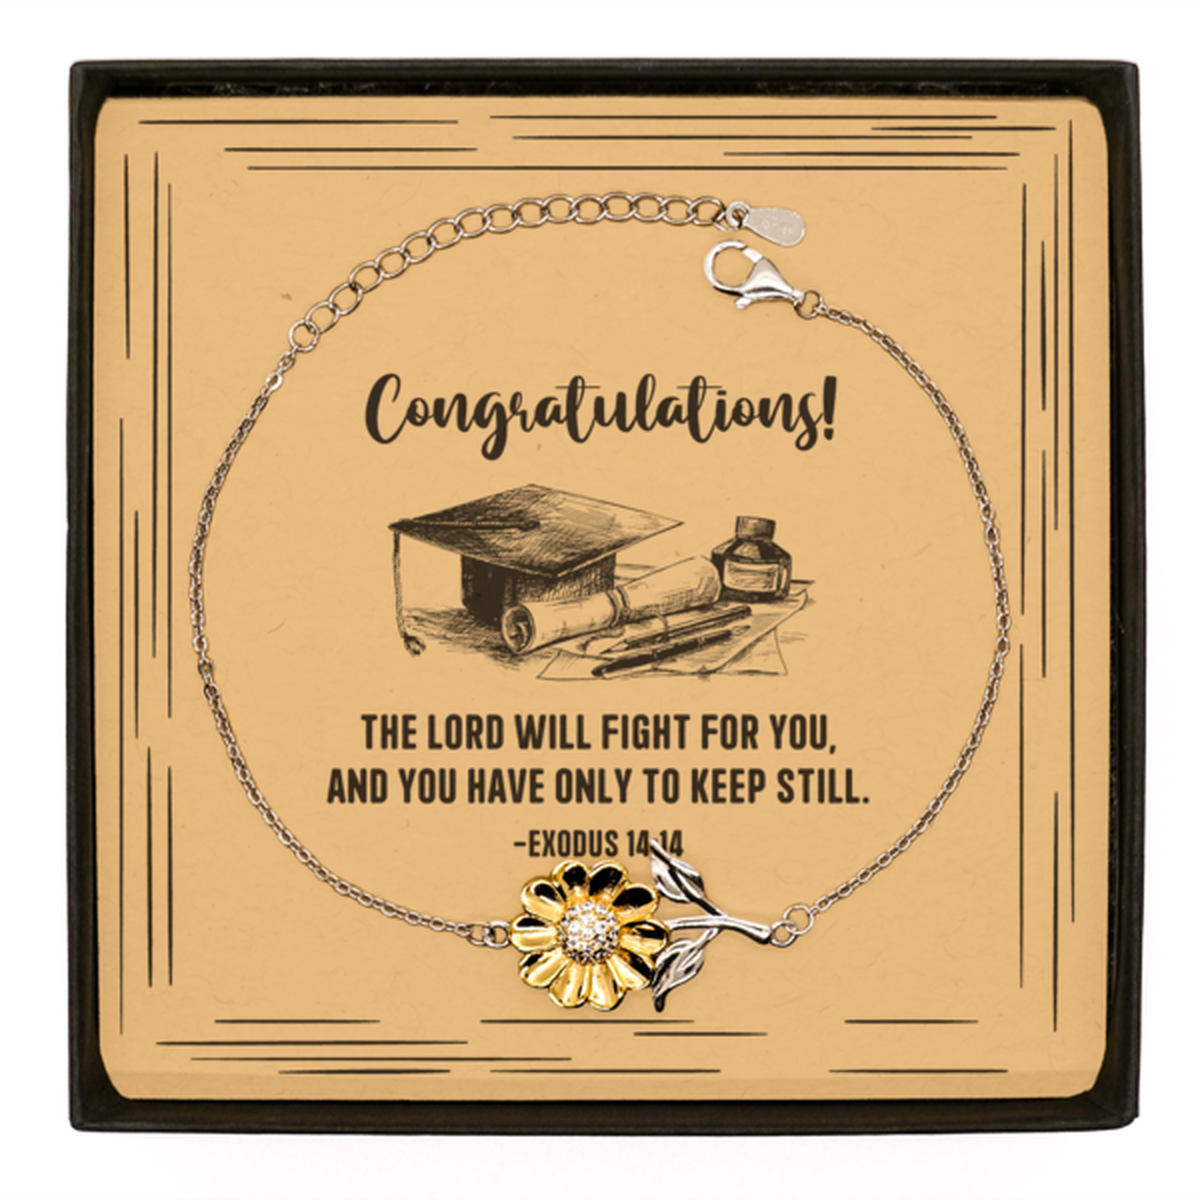 Religious Graduation Cards, The Lord will fight for you, Bible Verse .925 Sterling Silver Sunflower Bracelet, Christian Graduation Gifts